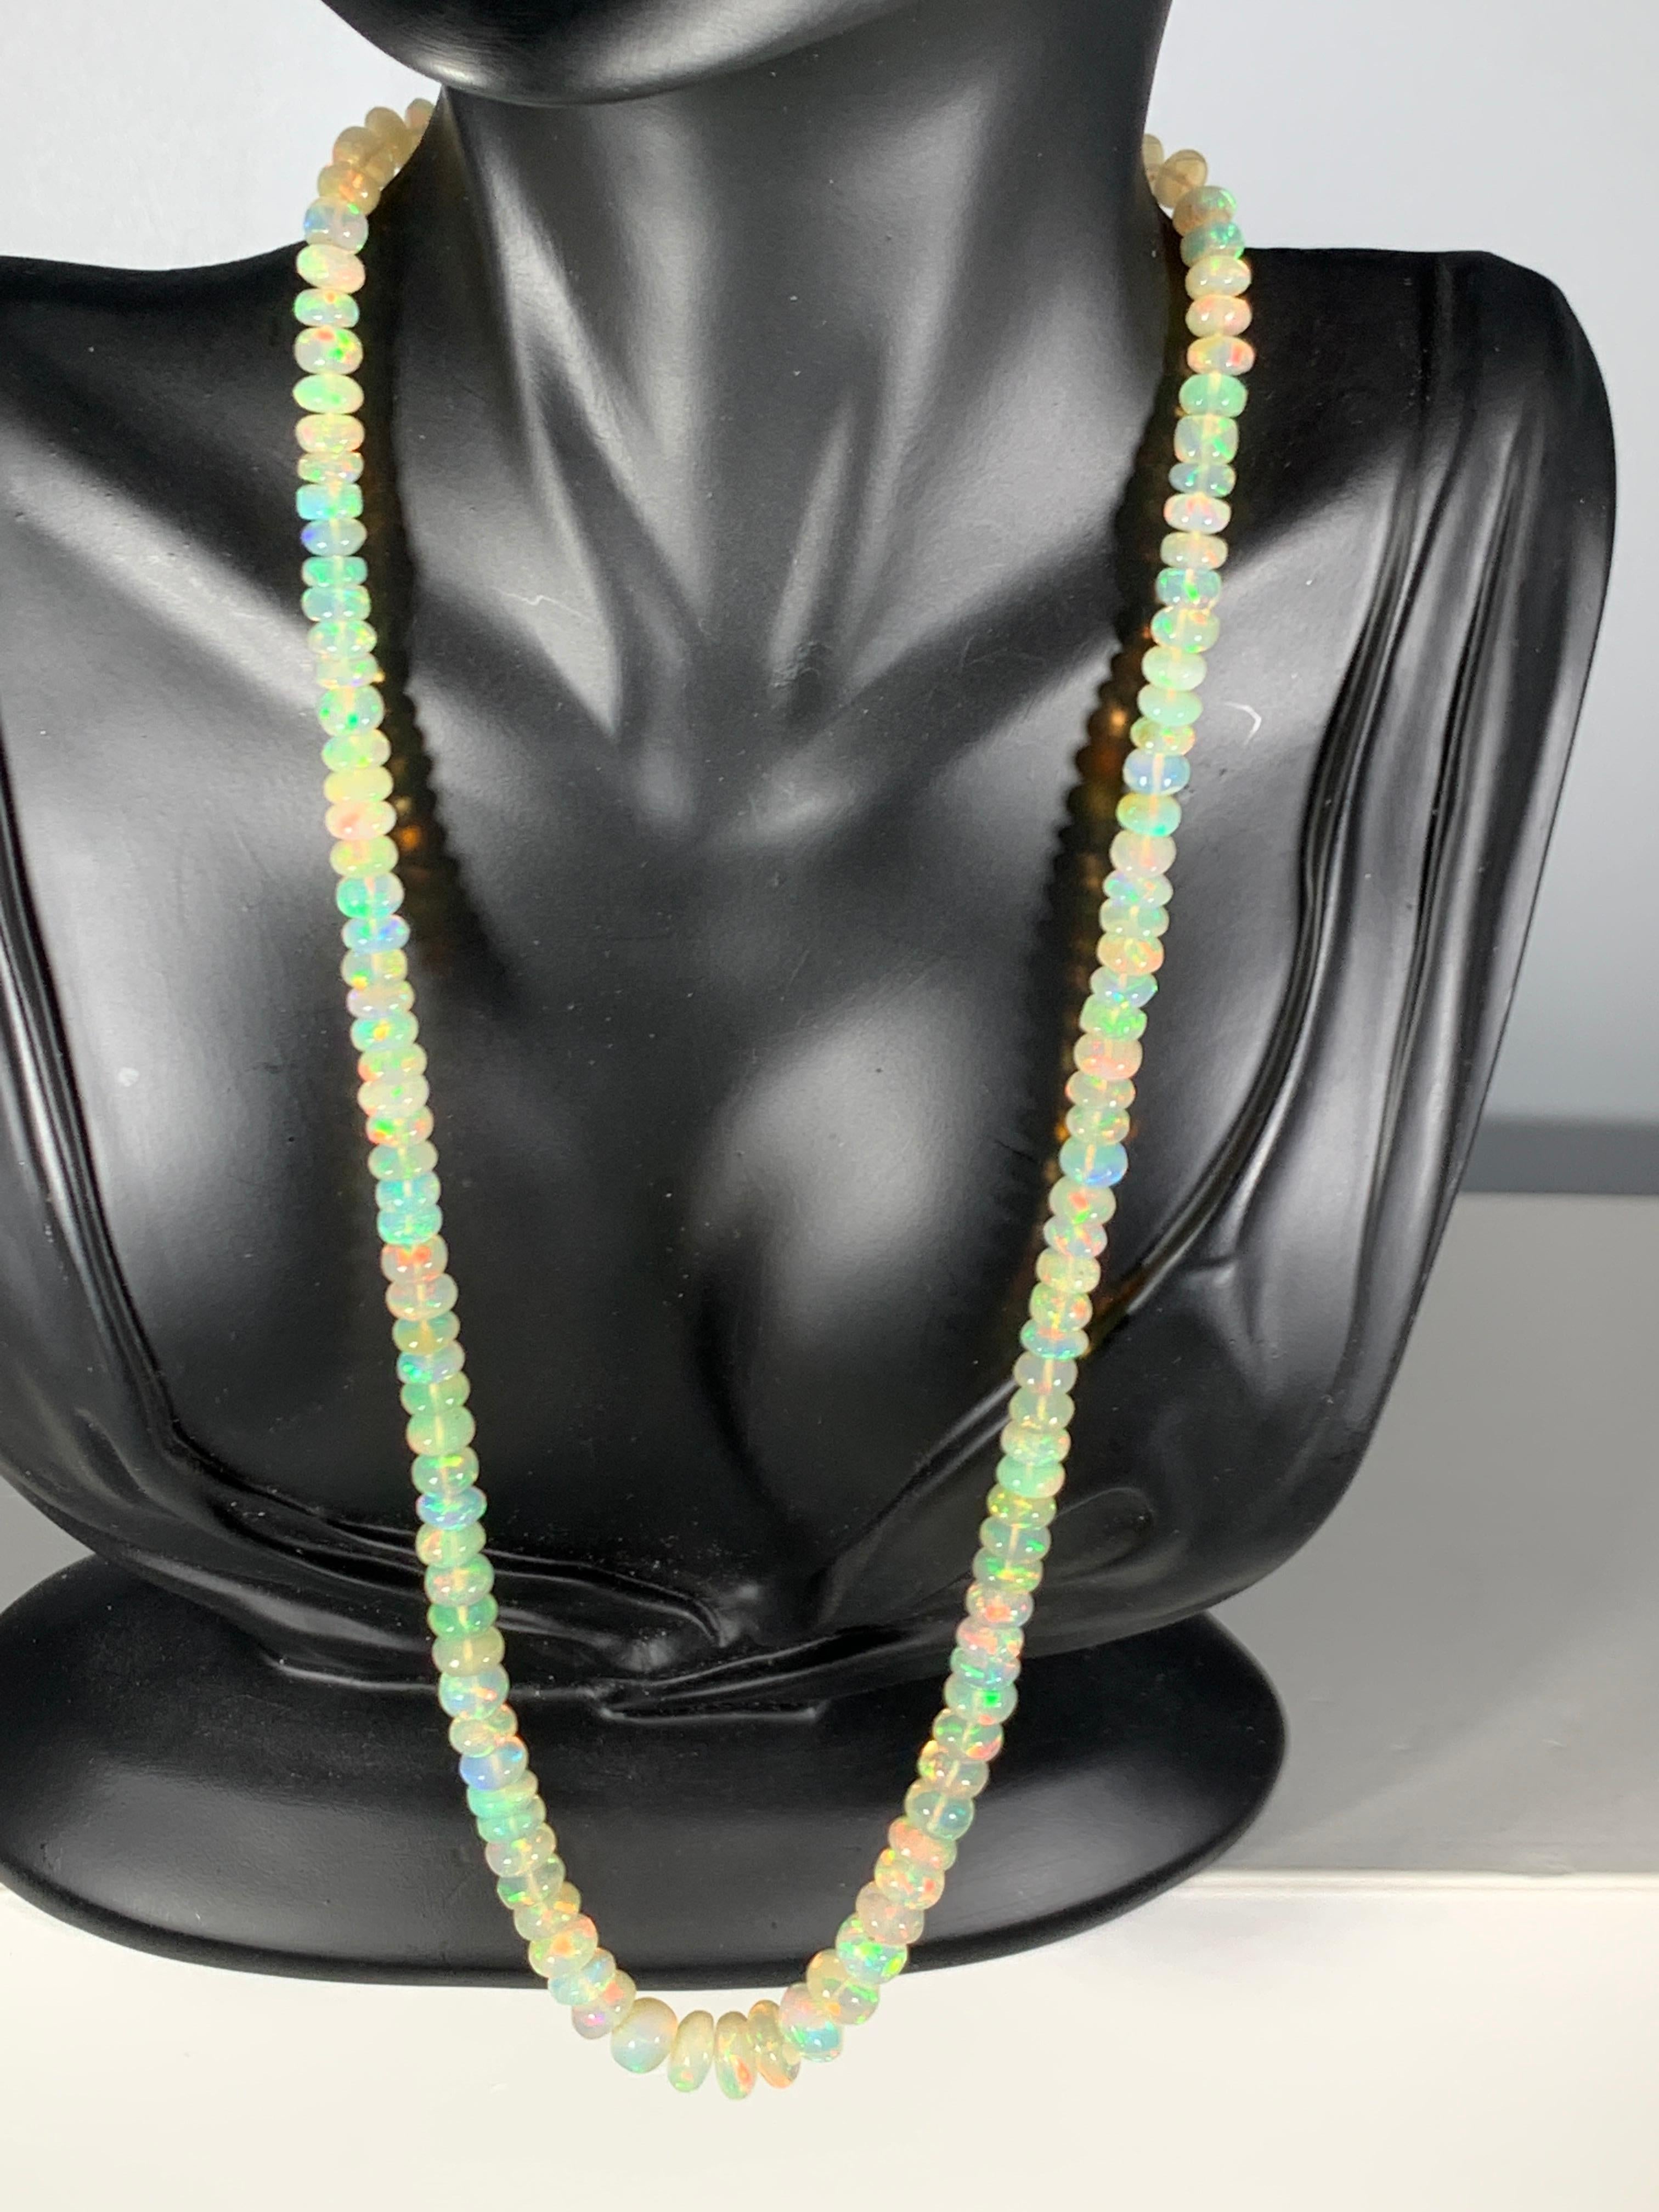 Natural 114 Ct Ethiopian Opal Bead Single Strand Necklace 14 Karat Yellow Gold In Excellent Condition For Sale In New York, NY